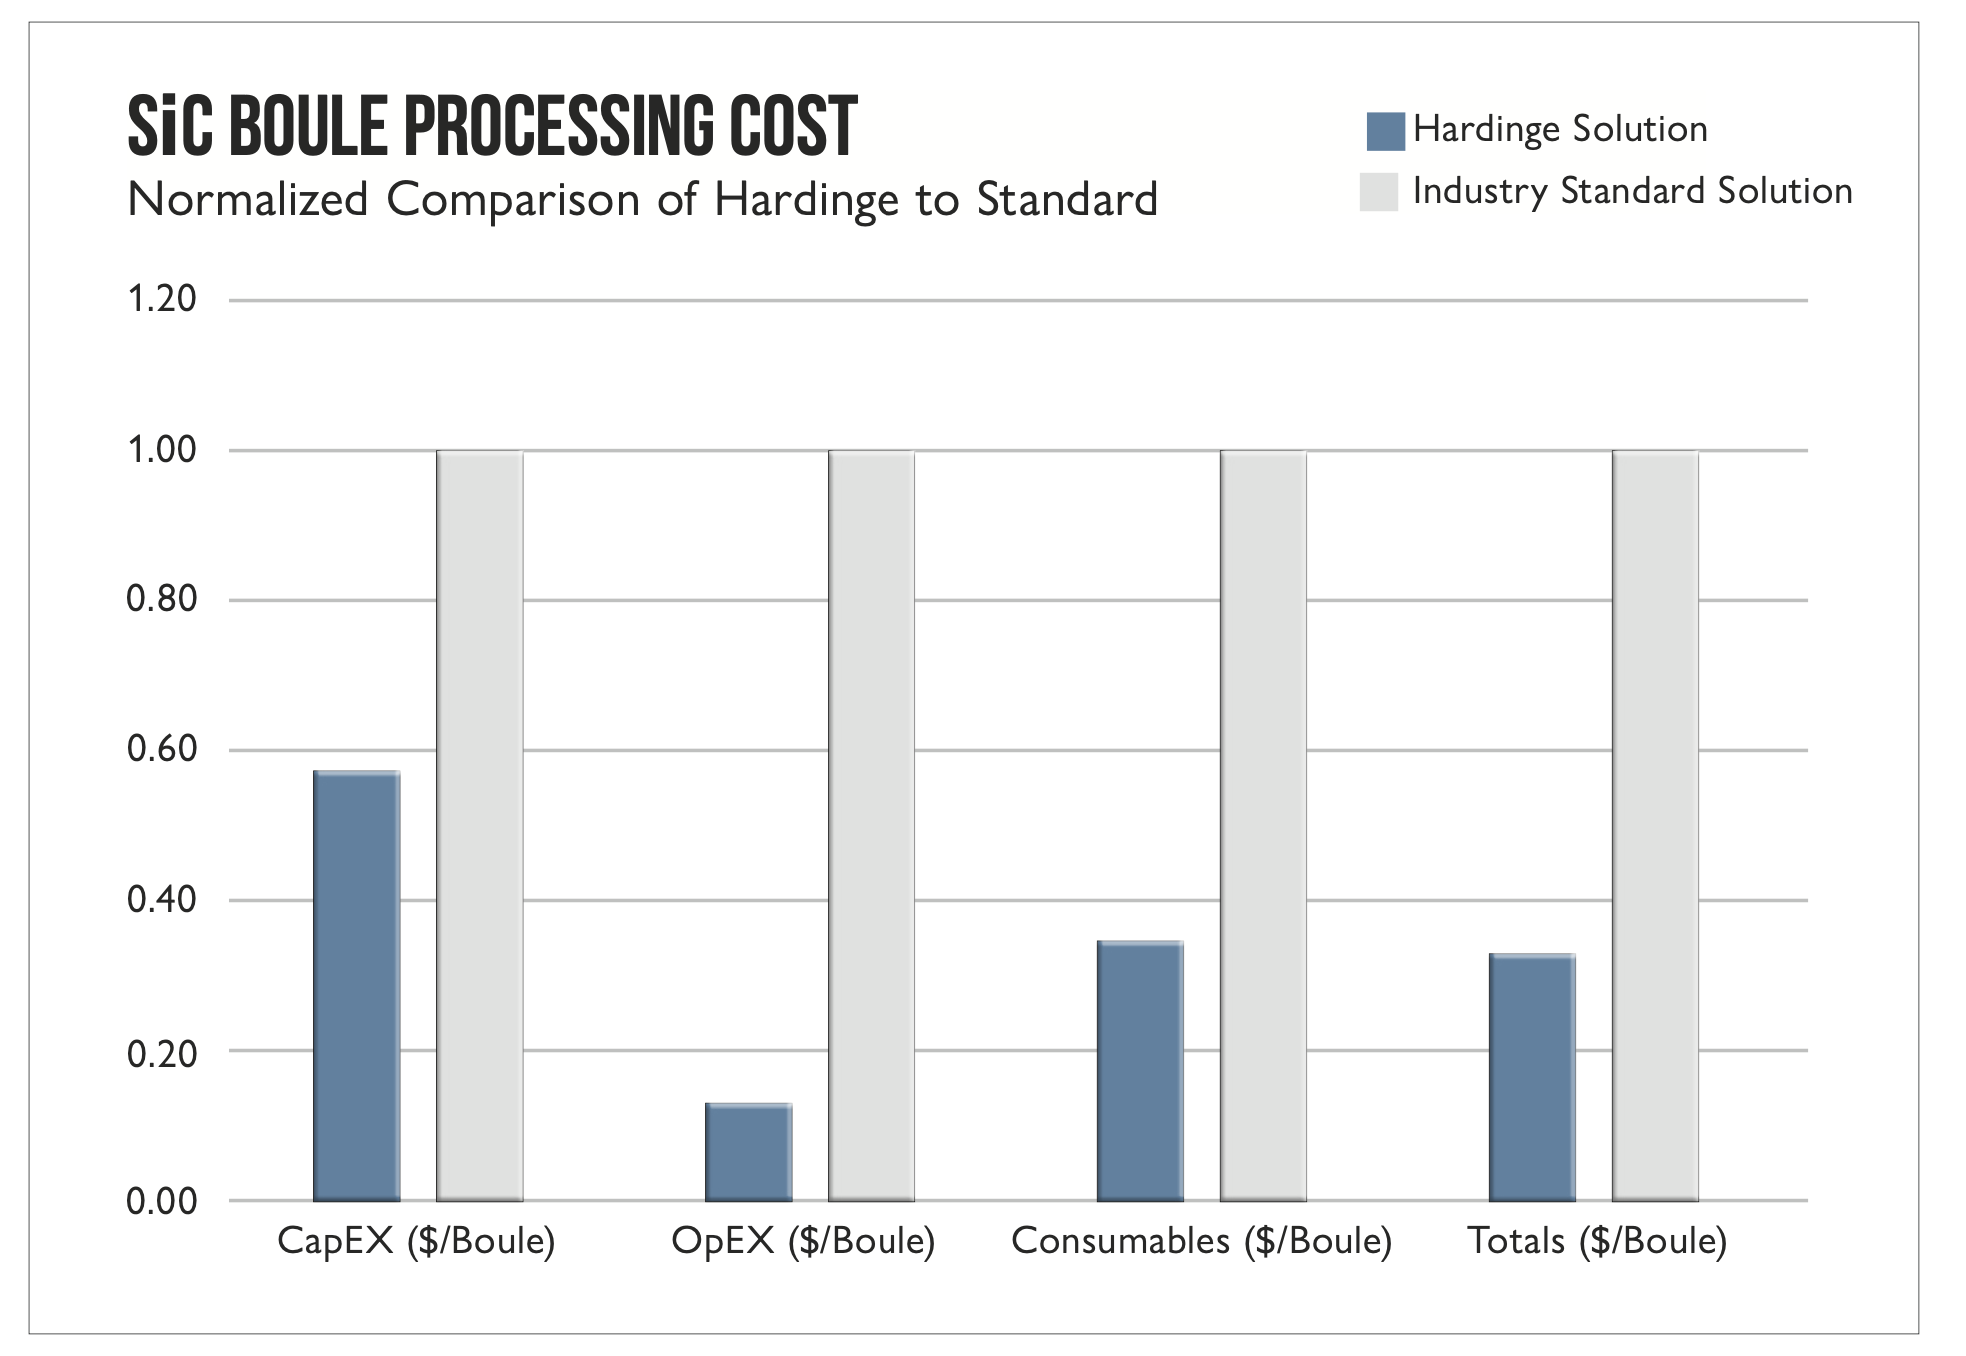 SiC Boule Processing Cost